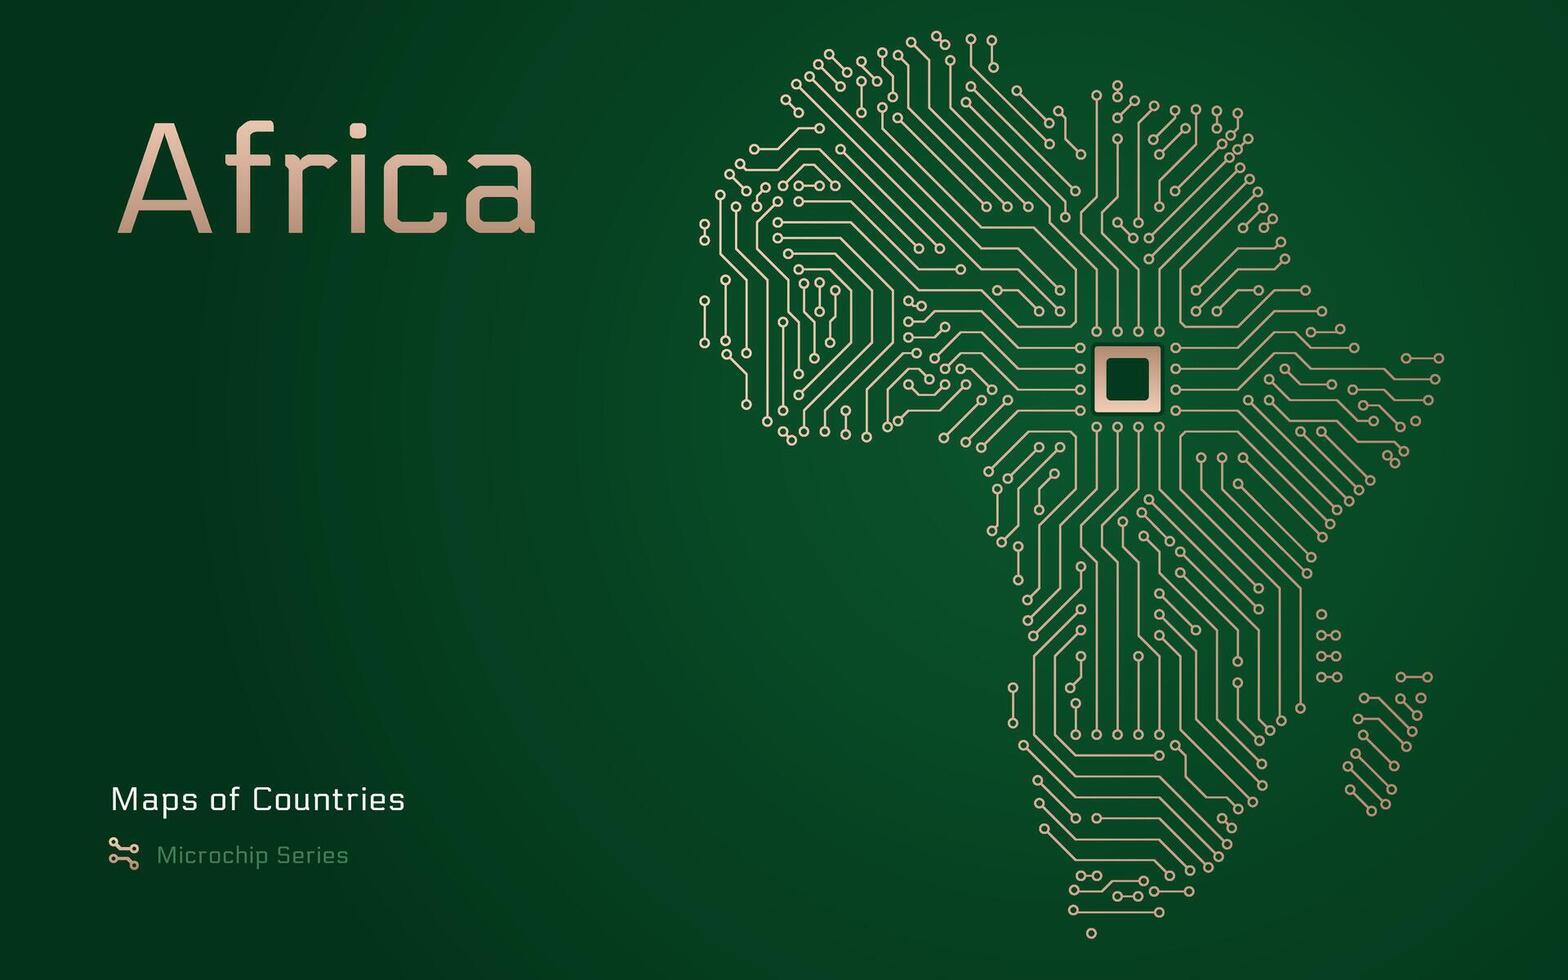 Africa Map with Shown in a Microchip Pattern. E-government. Continent maps. Microchip Series vector